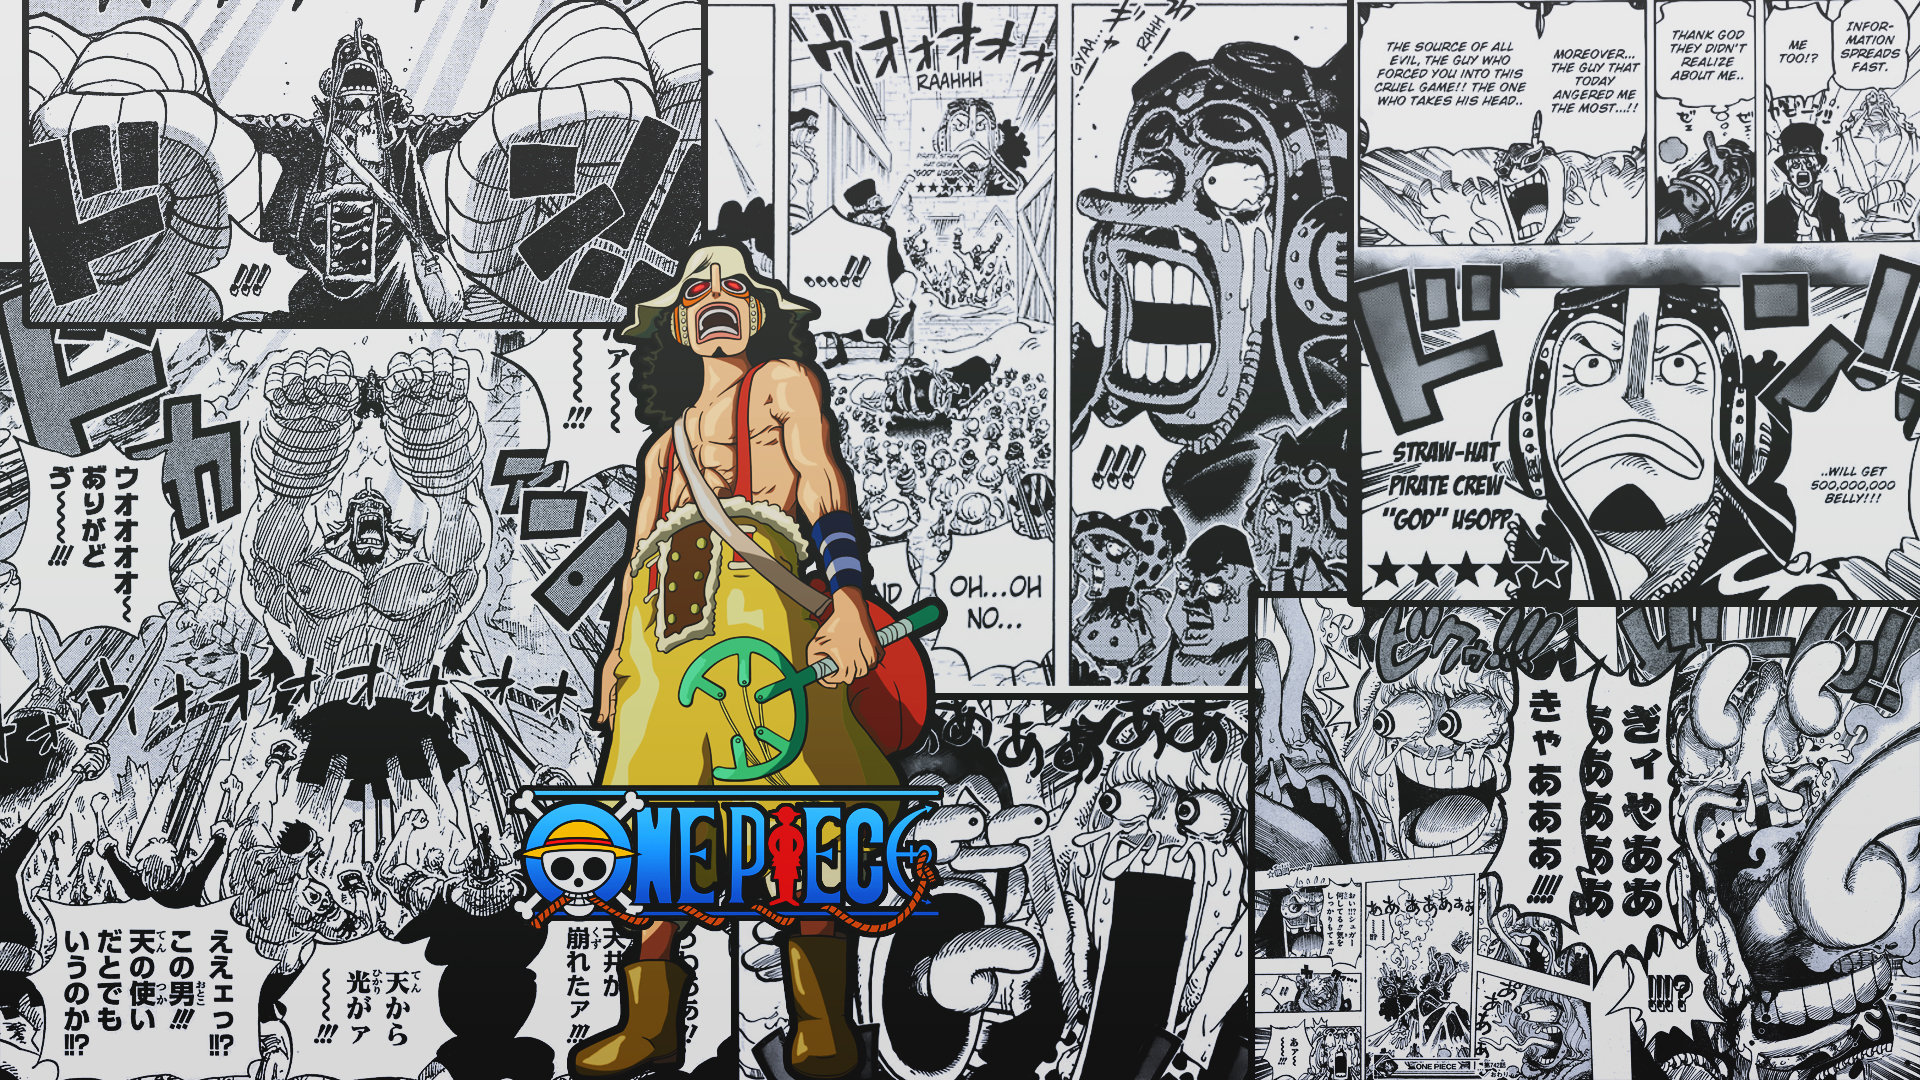  Usopp  One  Piece  wallpapers  1920x1080 Full HD 1080p 